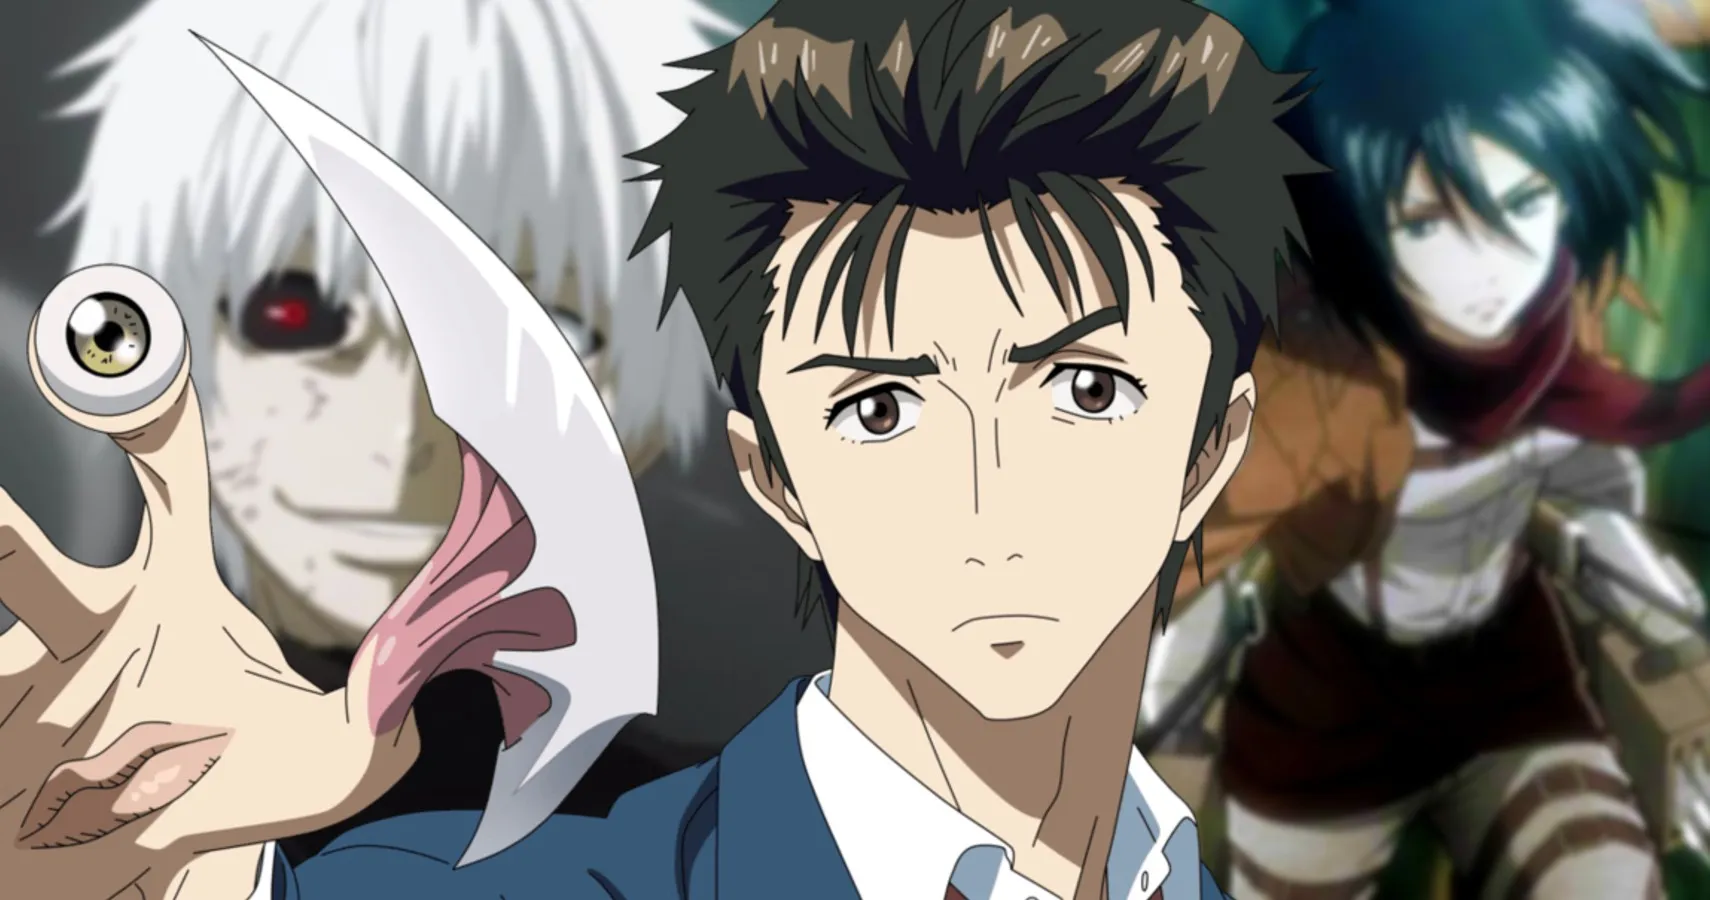 Parasyte Anime Revival: How the Terrifying Tale of Shinichi and Migi Keeps Gripping New Generations